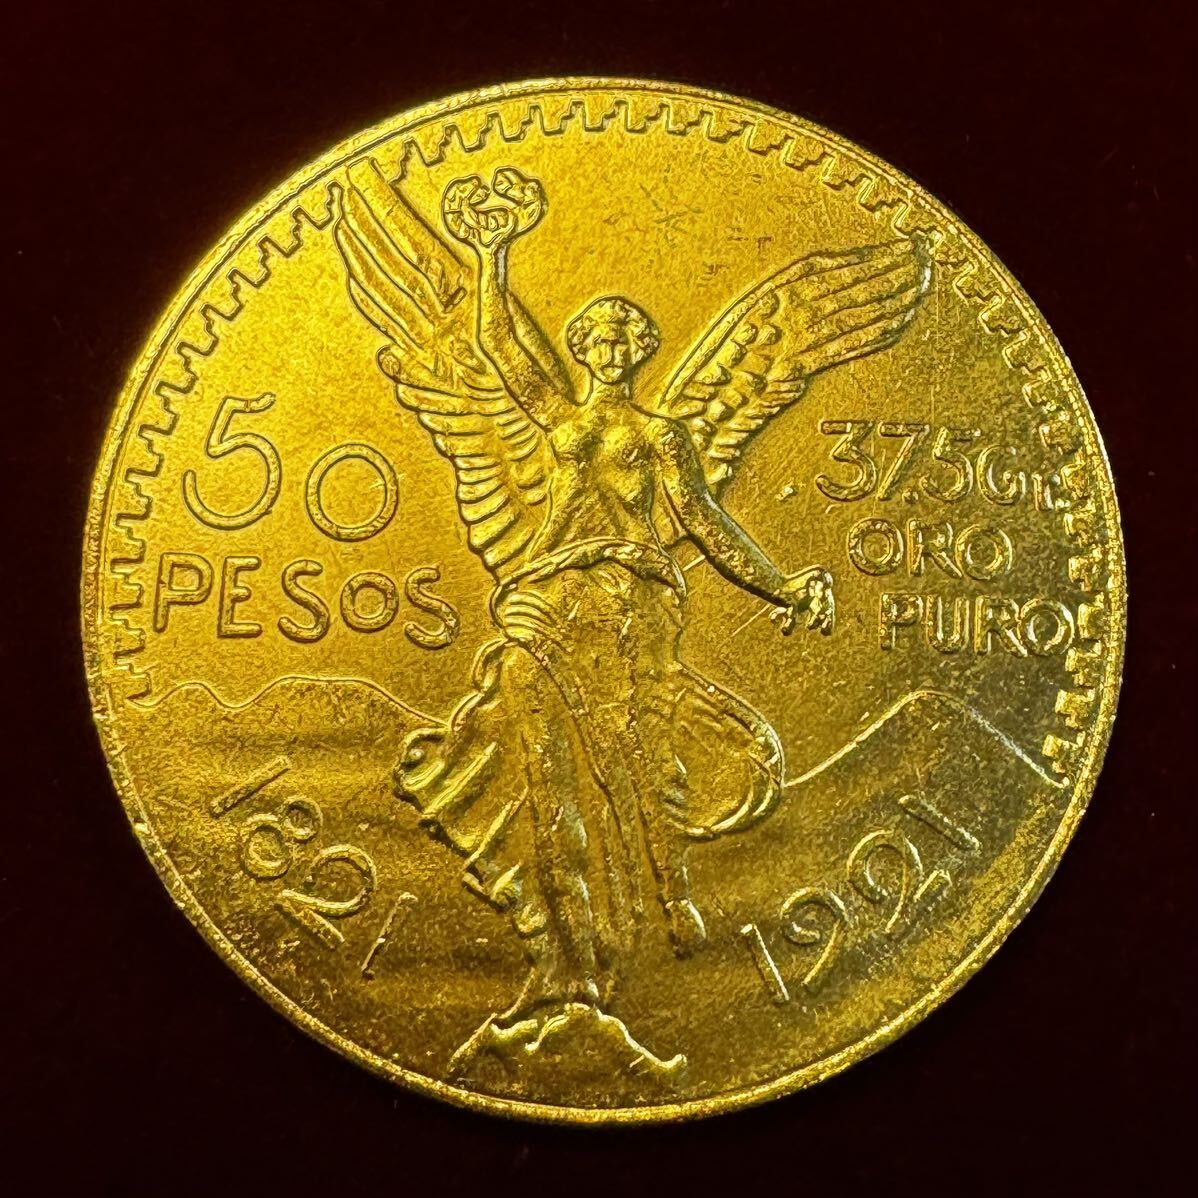  Mexico wing. exist free woman god coin old coin [ Mexico .. country ].popokatepetoru fire mountain chair ta comb u marks ru fire mountain memory . coin gold coin foreign old coin 